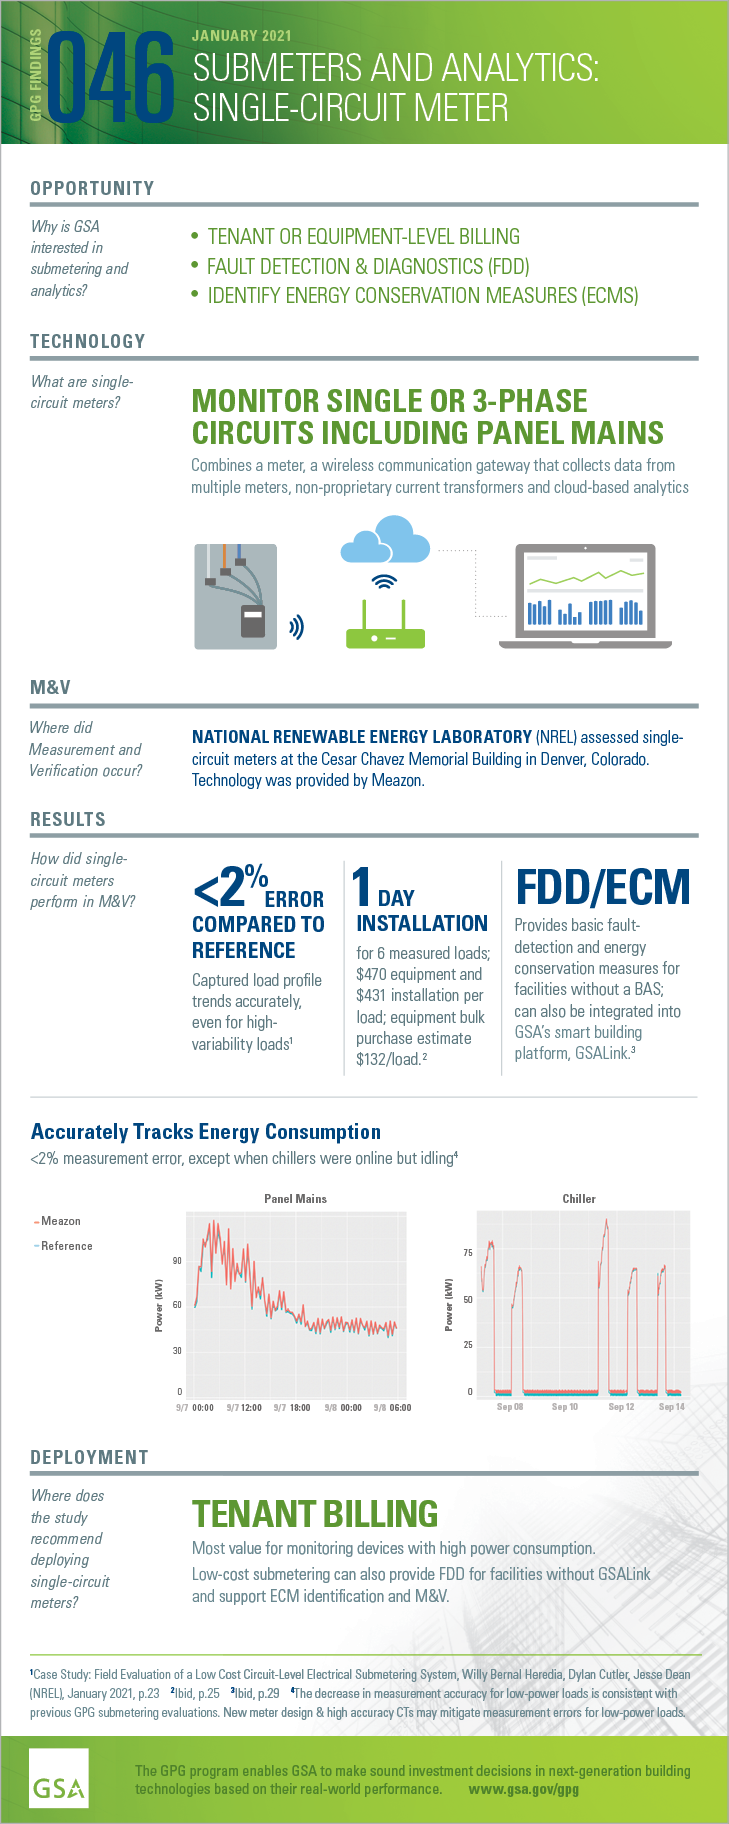 Download the PDF of the full-size infographic for GPG046 Single-Circuit Meter.